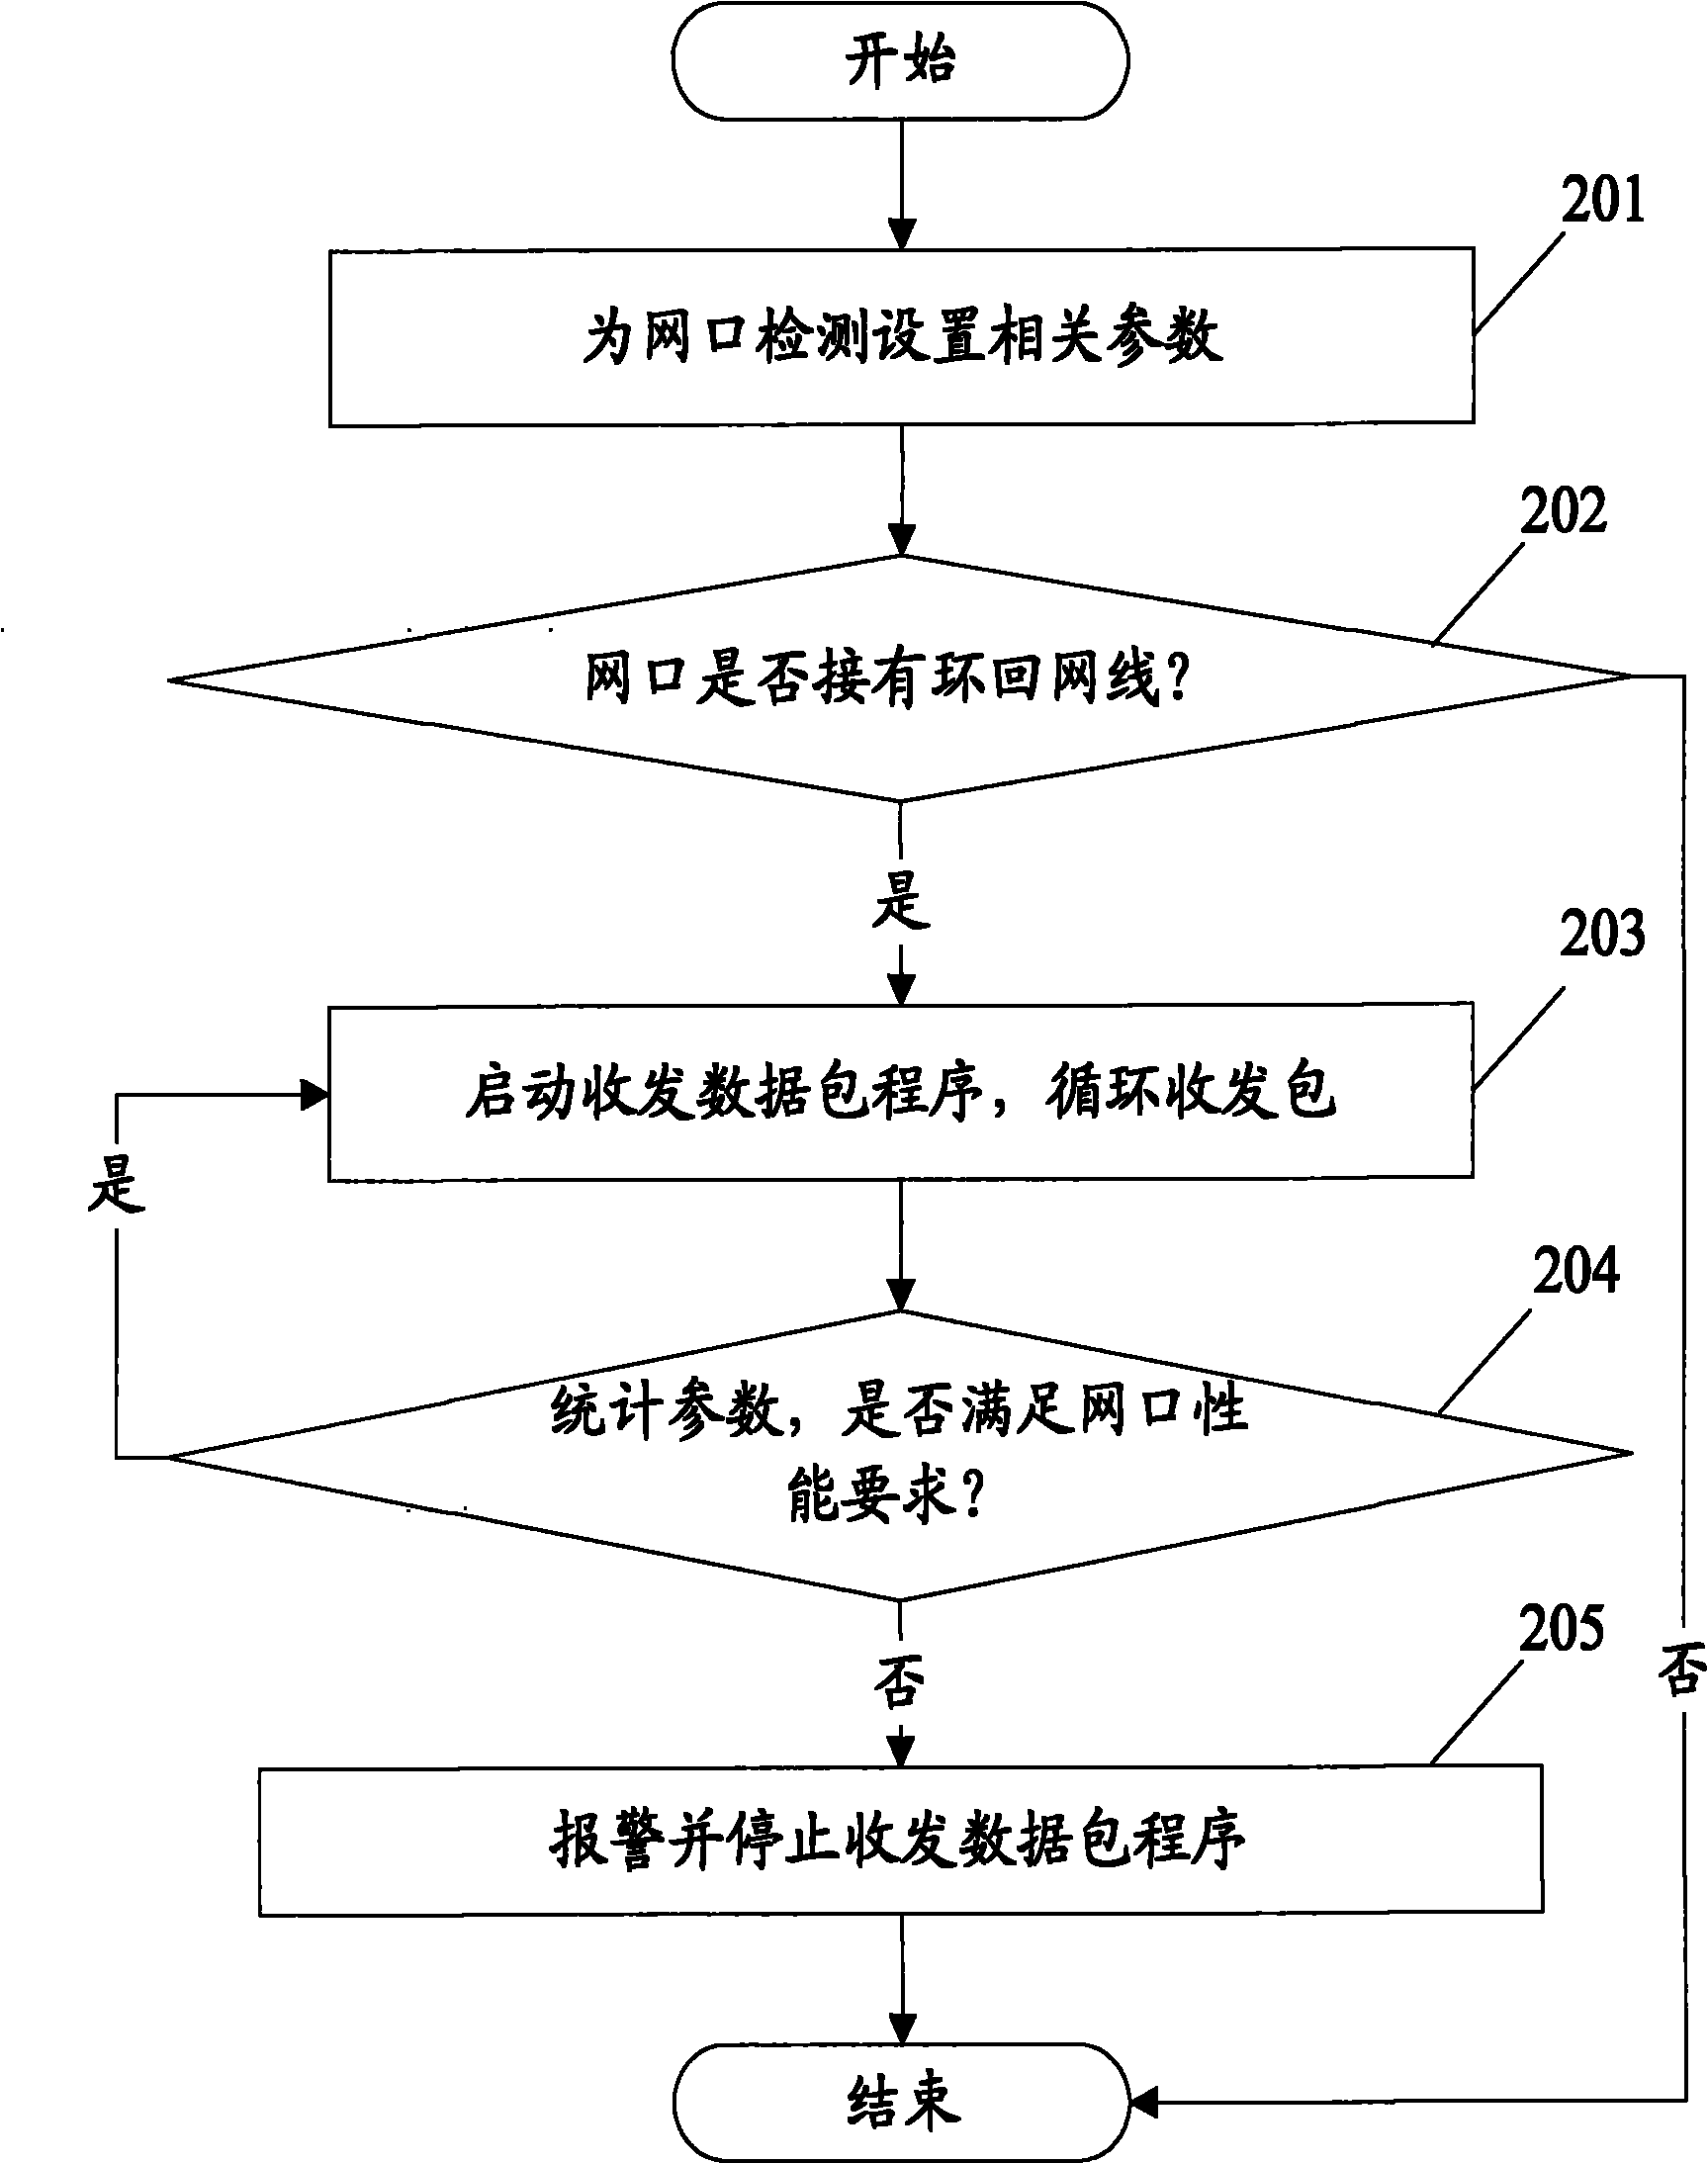 Method and device for detecting network port performance of IPTV set-top box